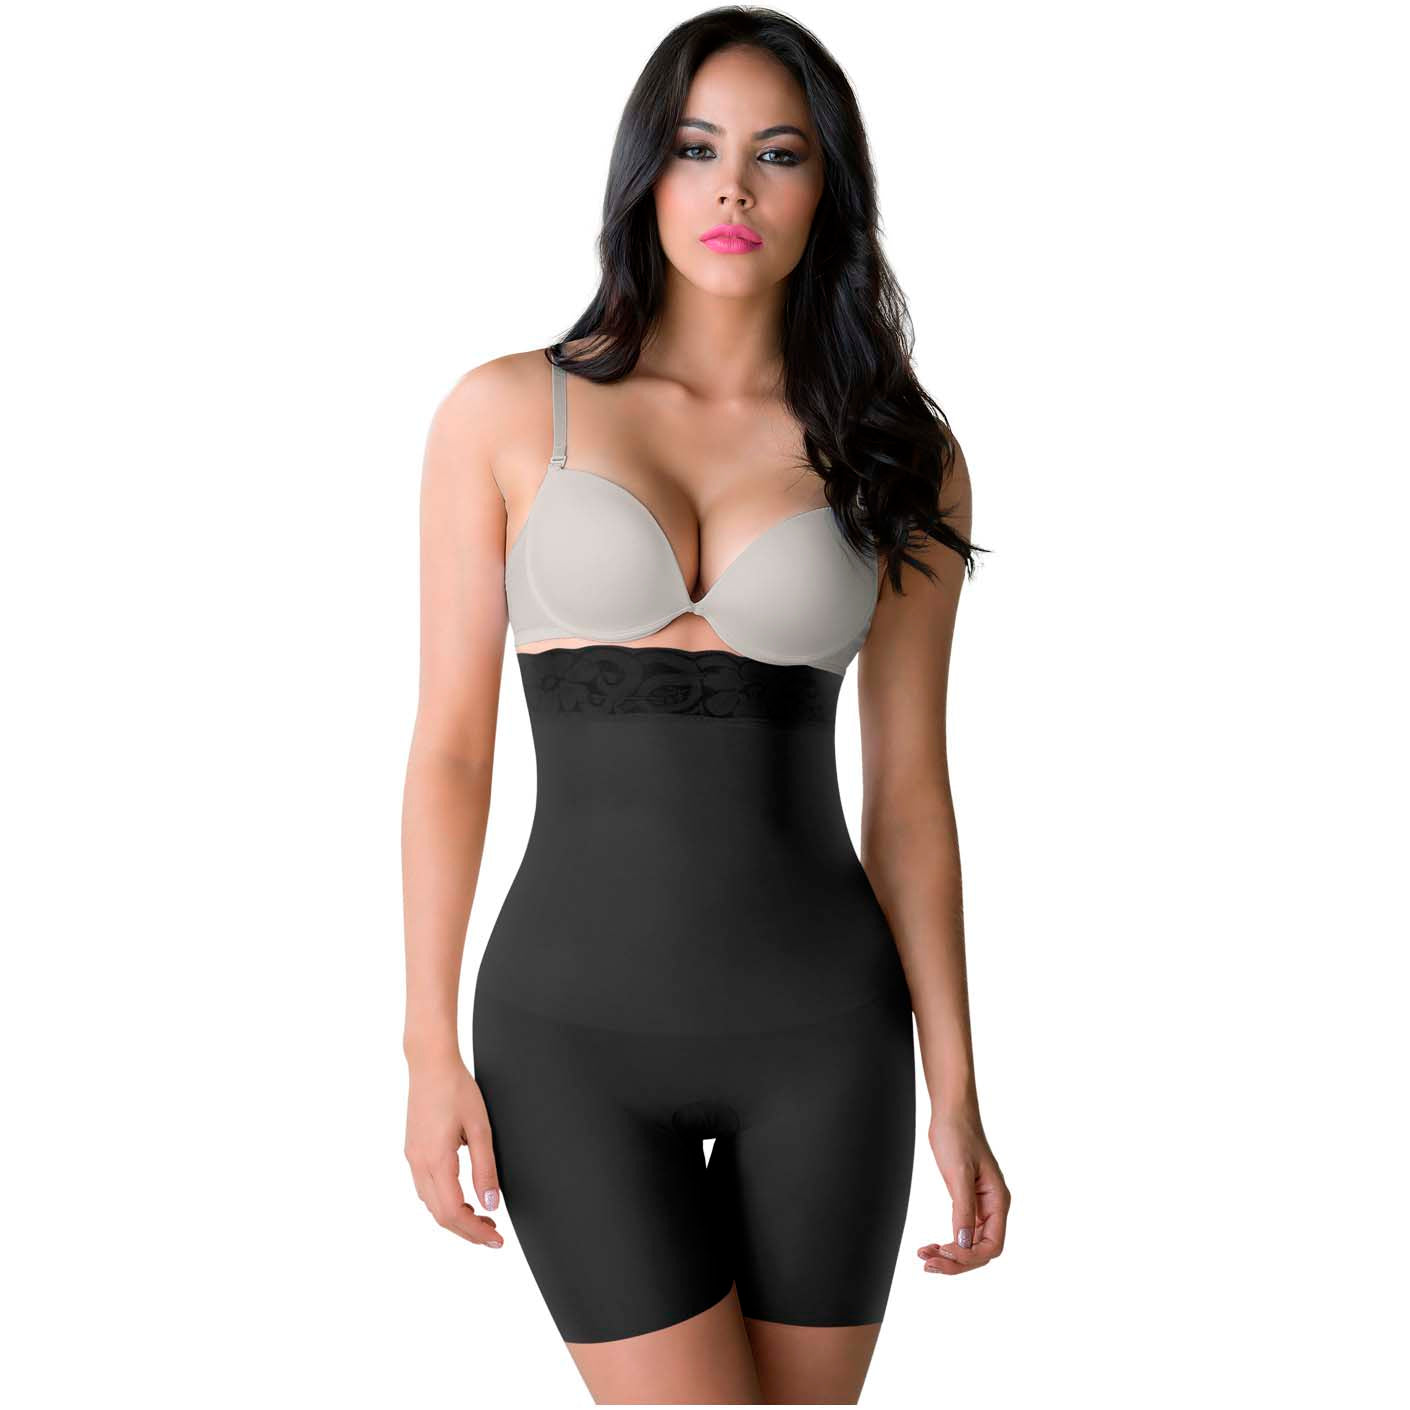 ROMANZA 2050 | STRAPLESS BODY SHAPER | UNNOTICEABLE UNDER ANY OUTFIT